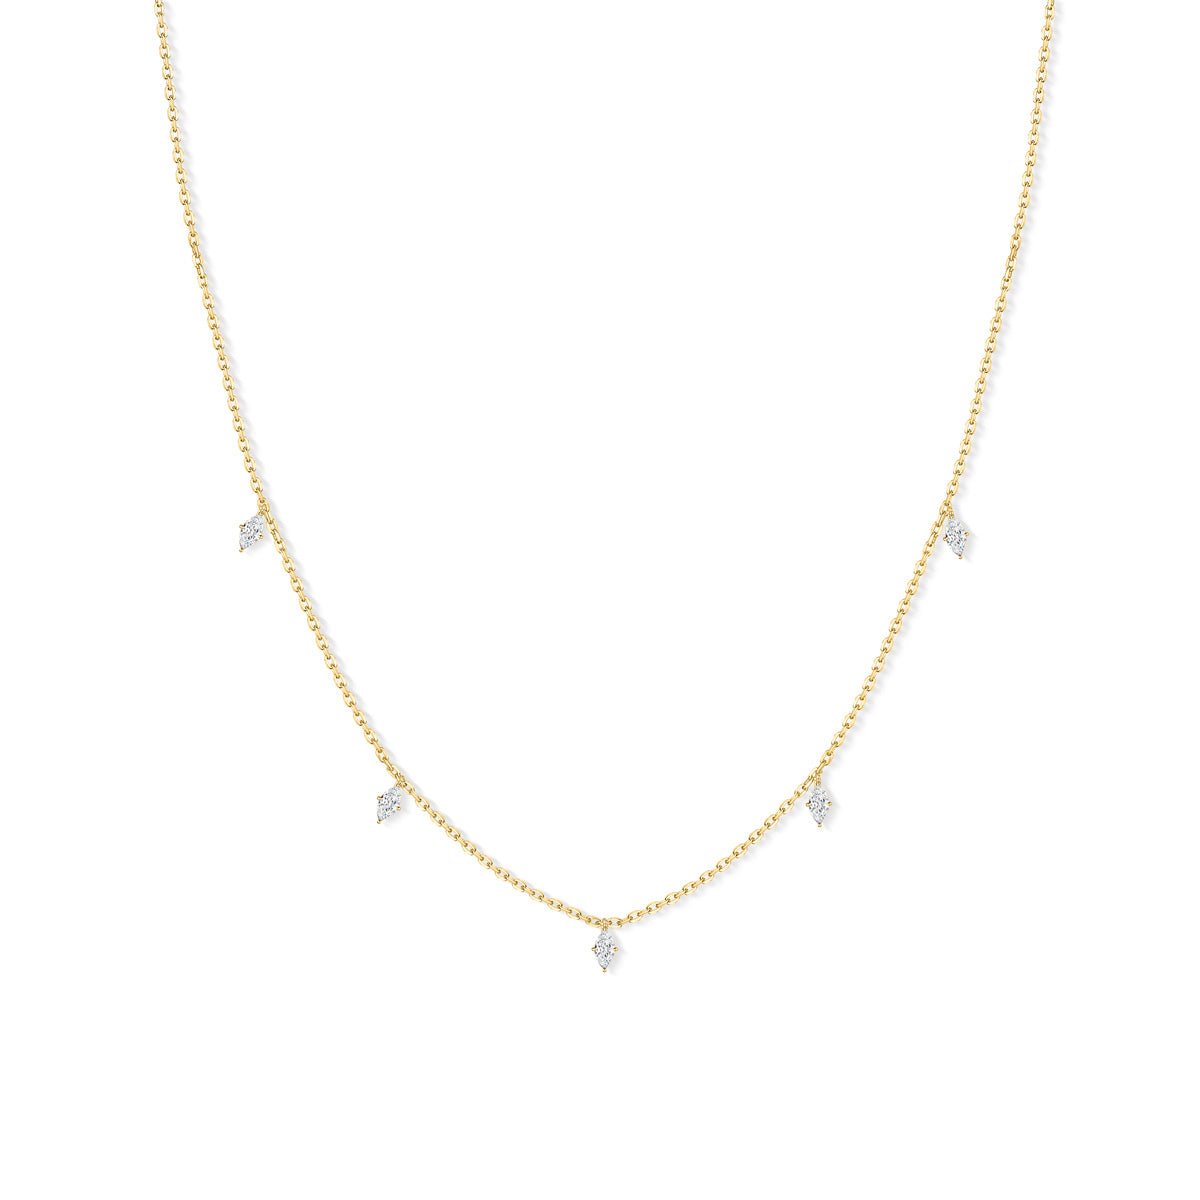 Cute gold studded chain necklace